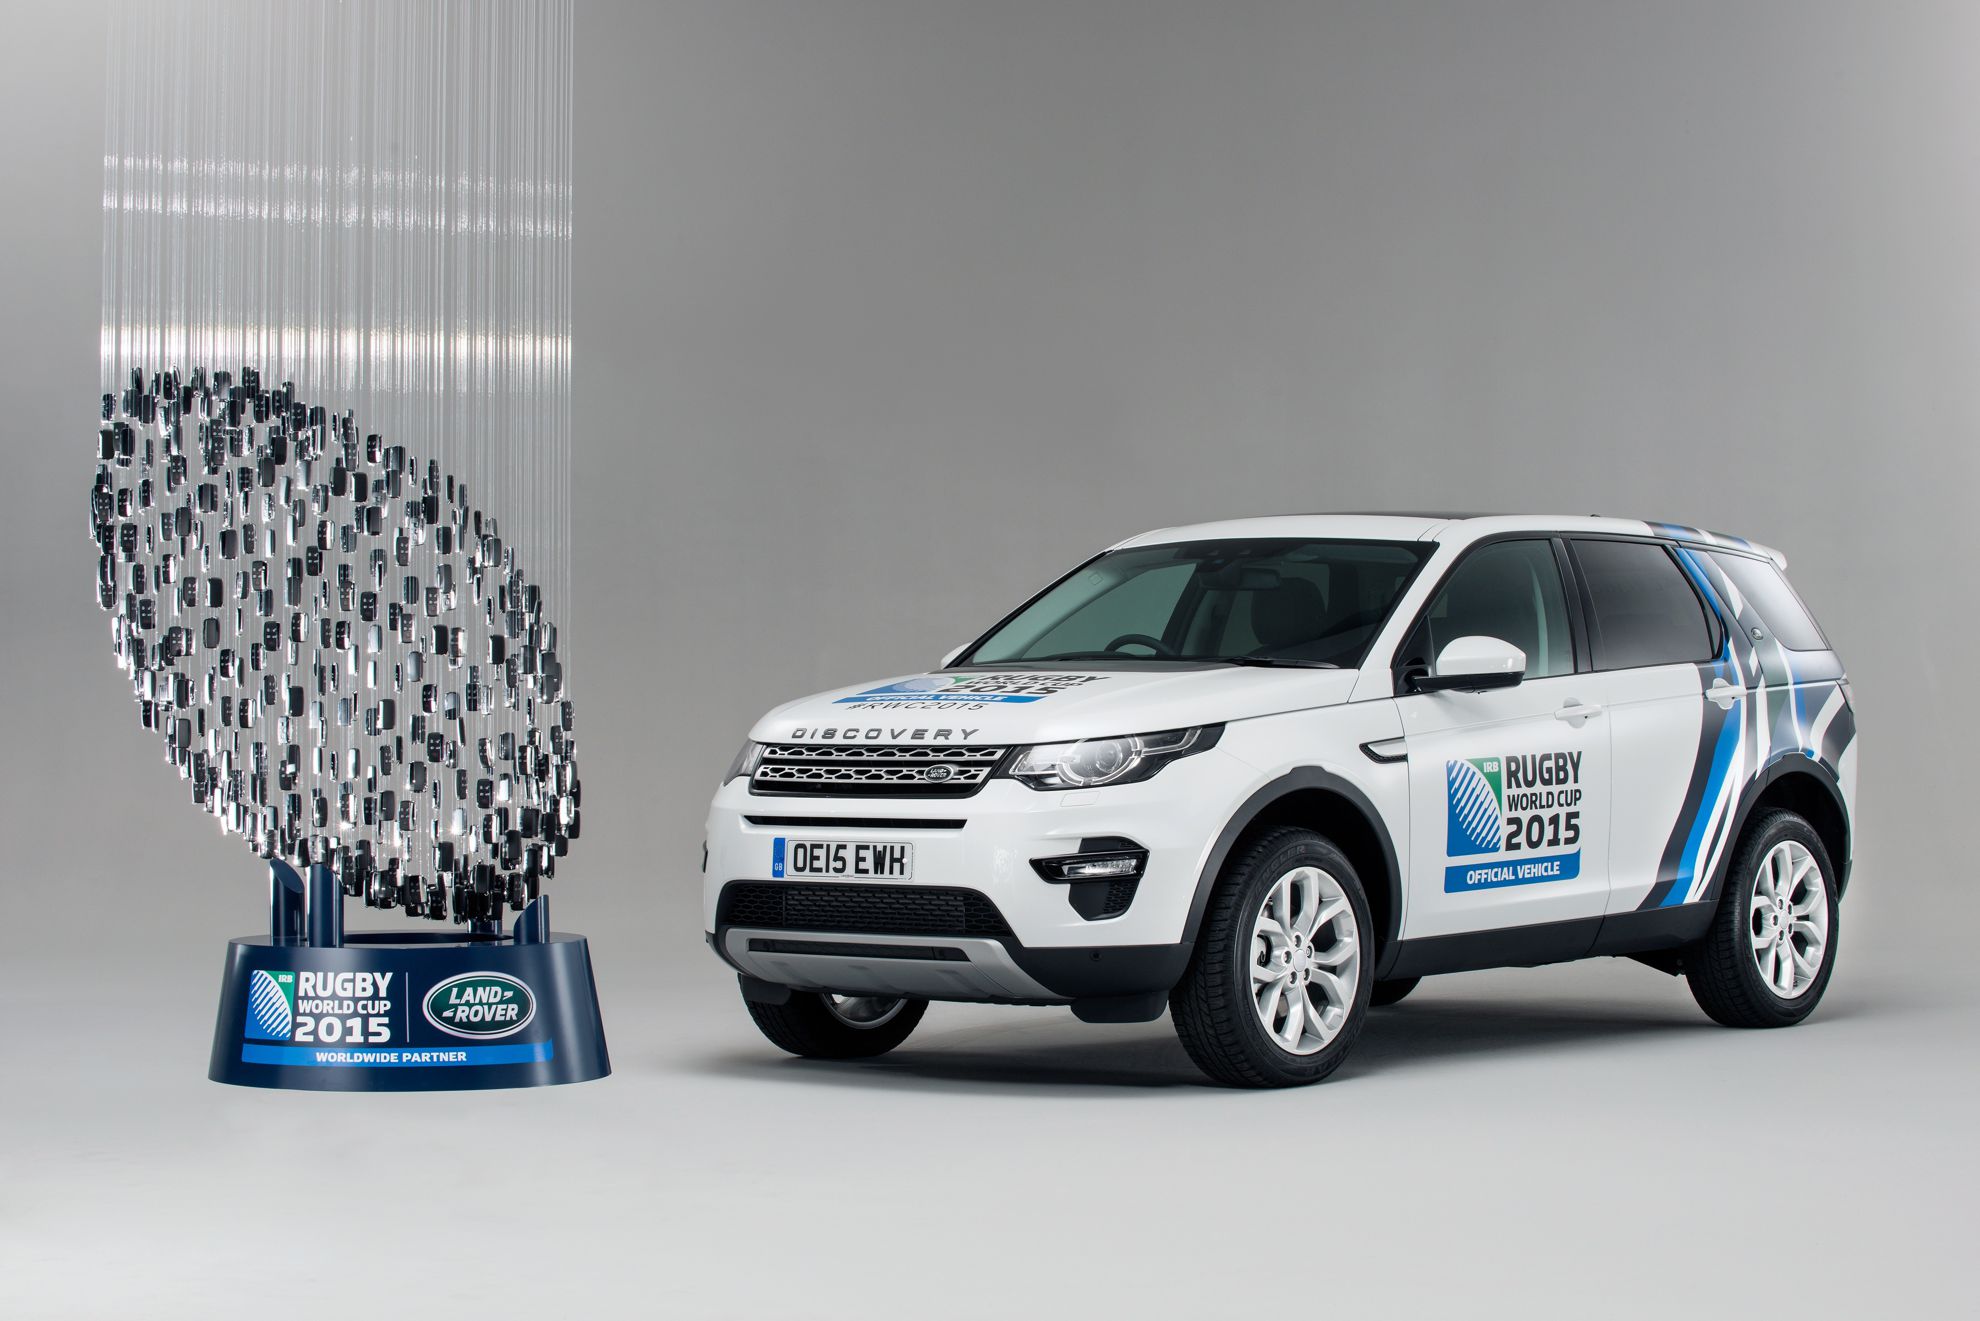 Rugby World Cup 2015 Official Vehicle Partner Land Rover